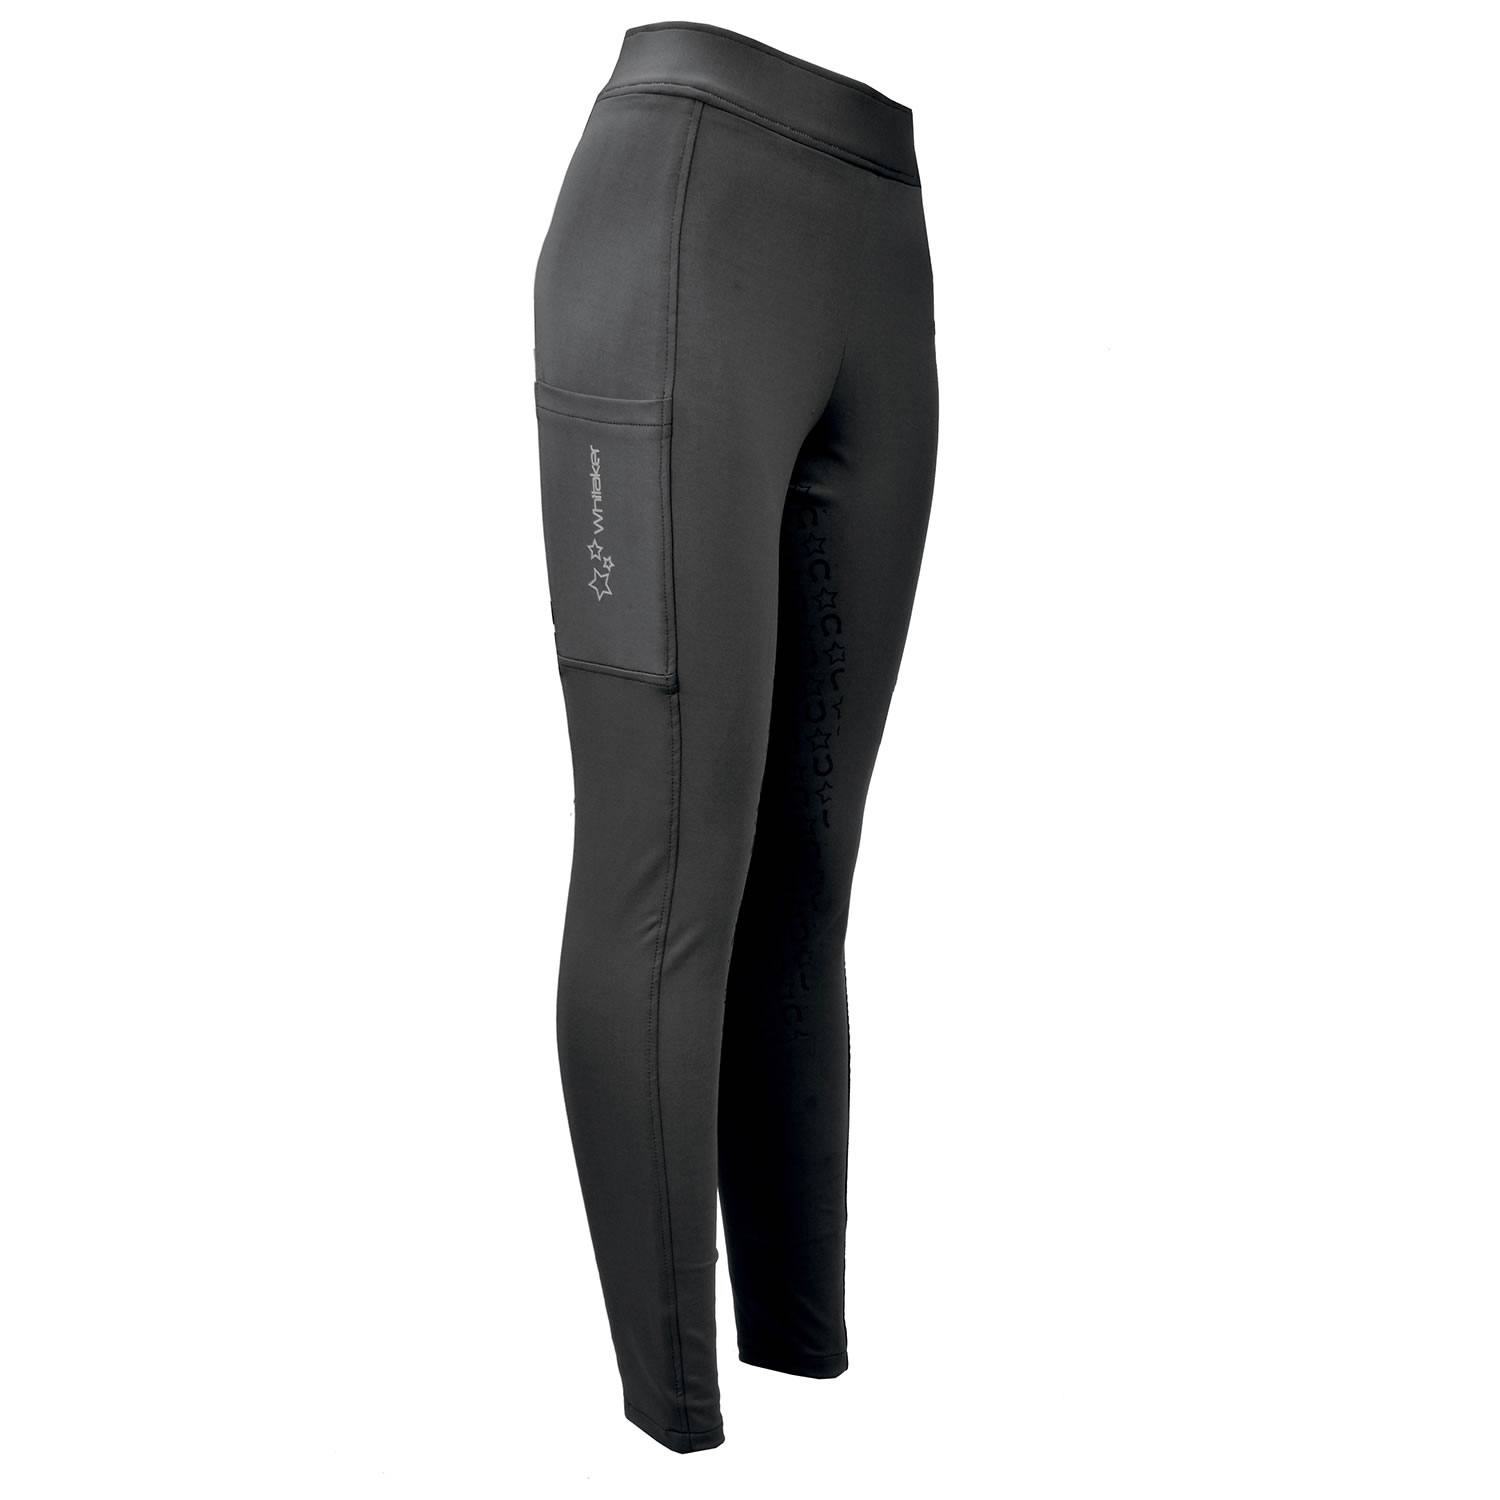 WHITAKER CLITHEROE RIDING TIGHTS CHILD BLACK  AGE 7 - 8 CHILD